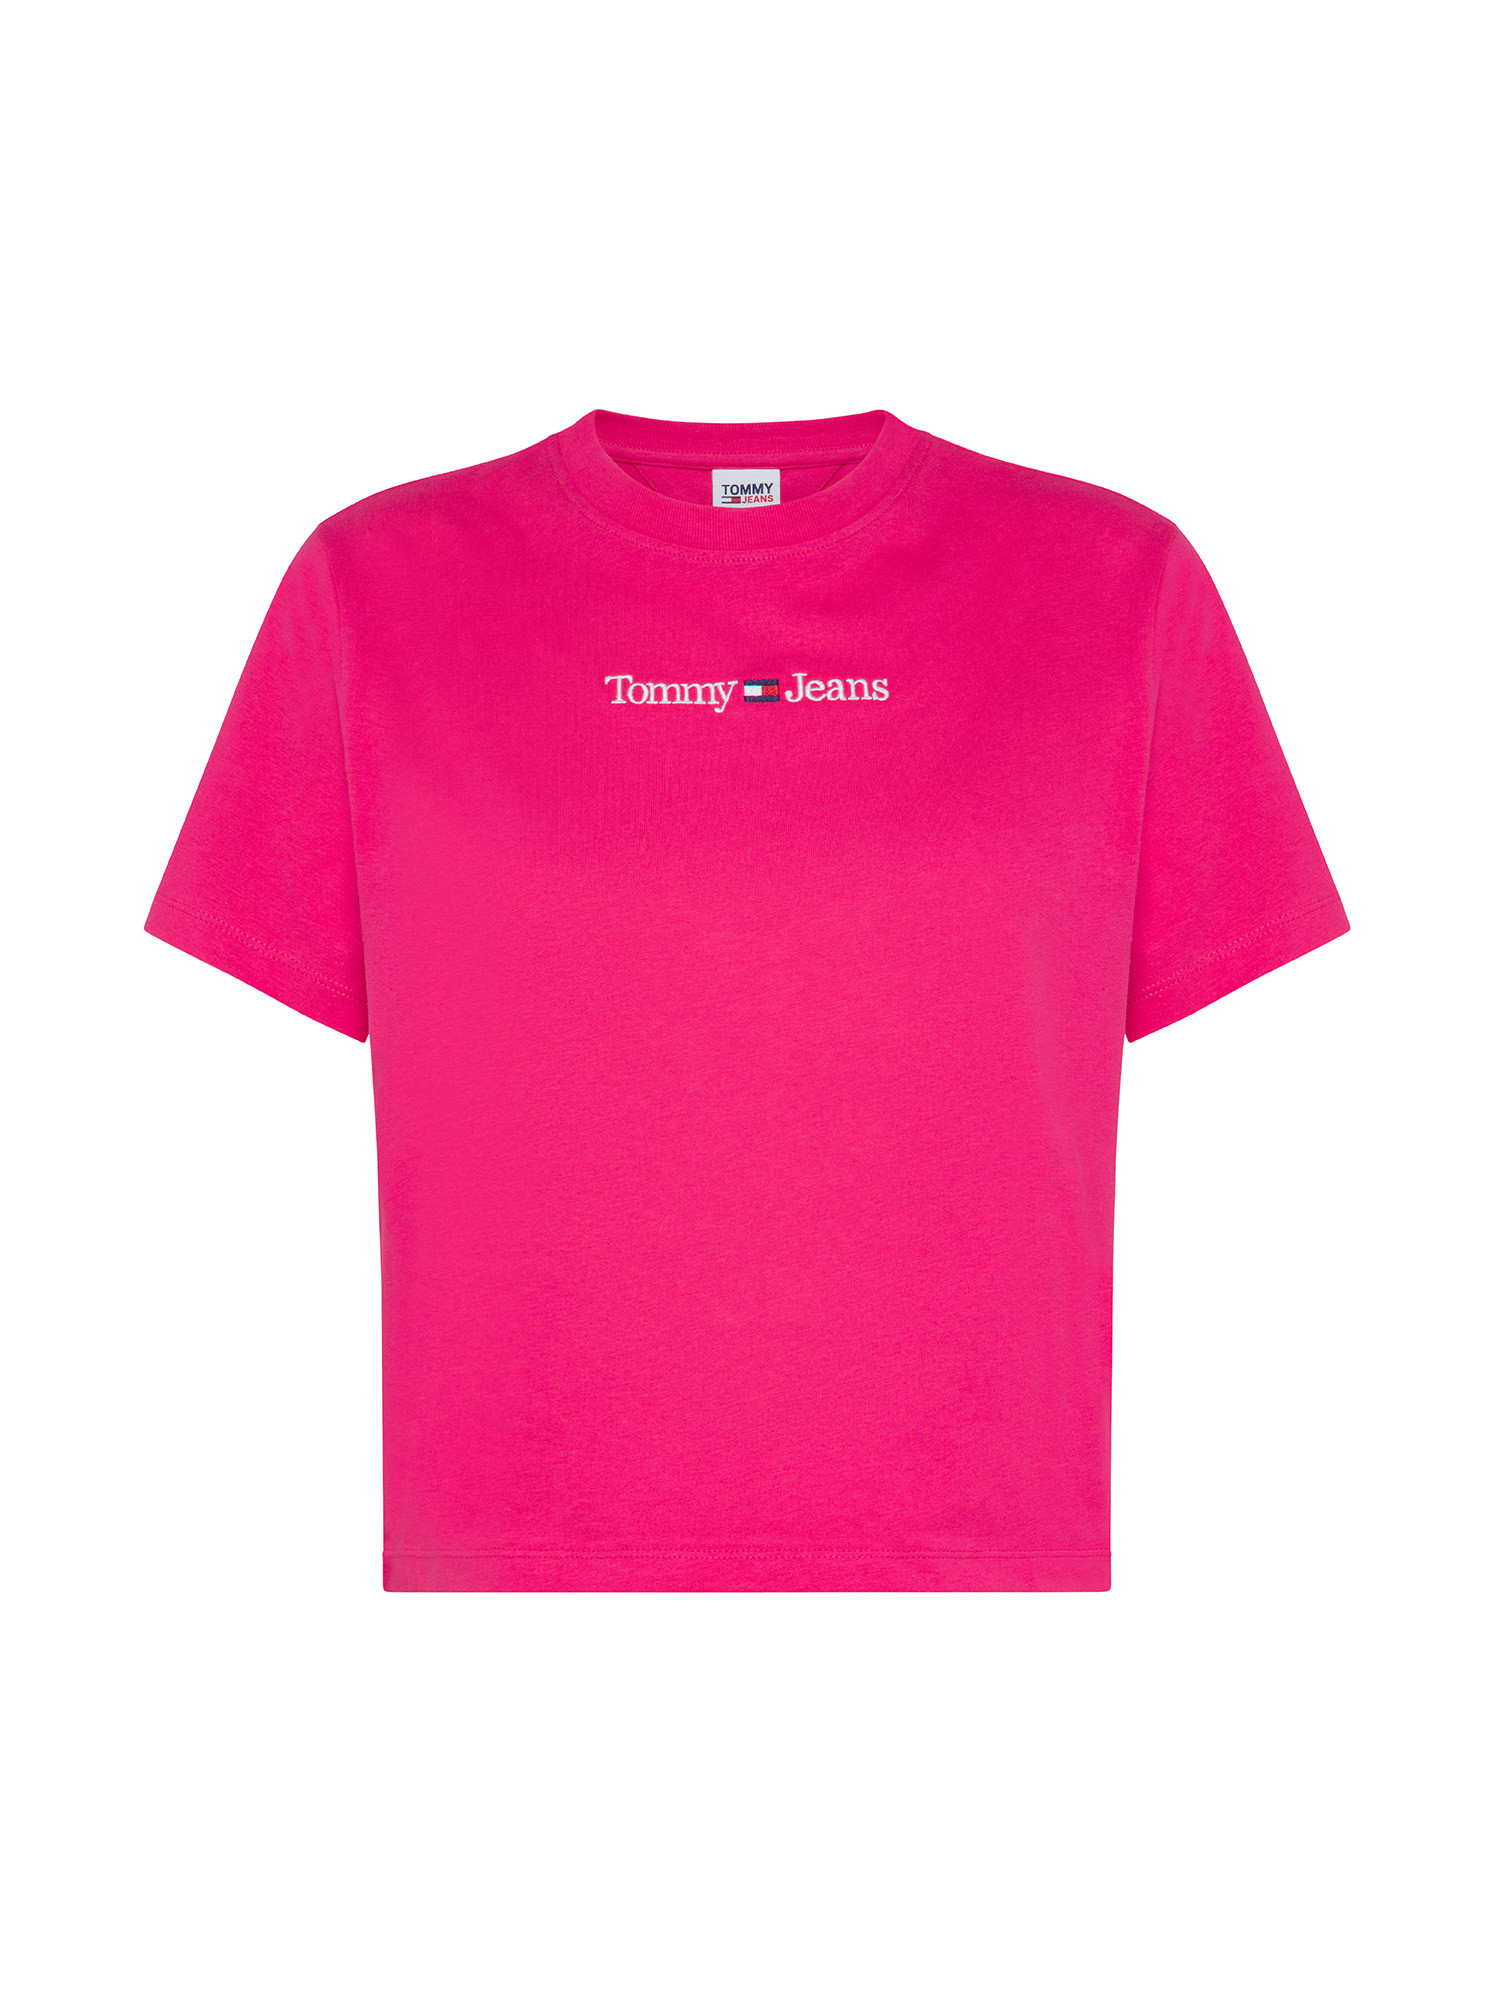 Tommy Jeans - T-shirt with embroidered logo in cotton, Pink Fuchsia, large image number 0